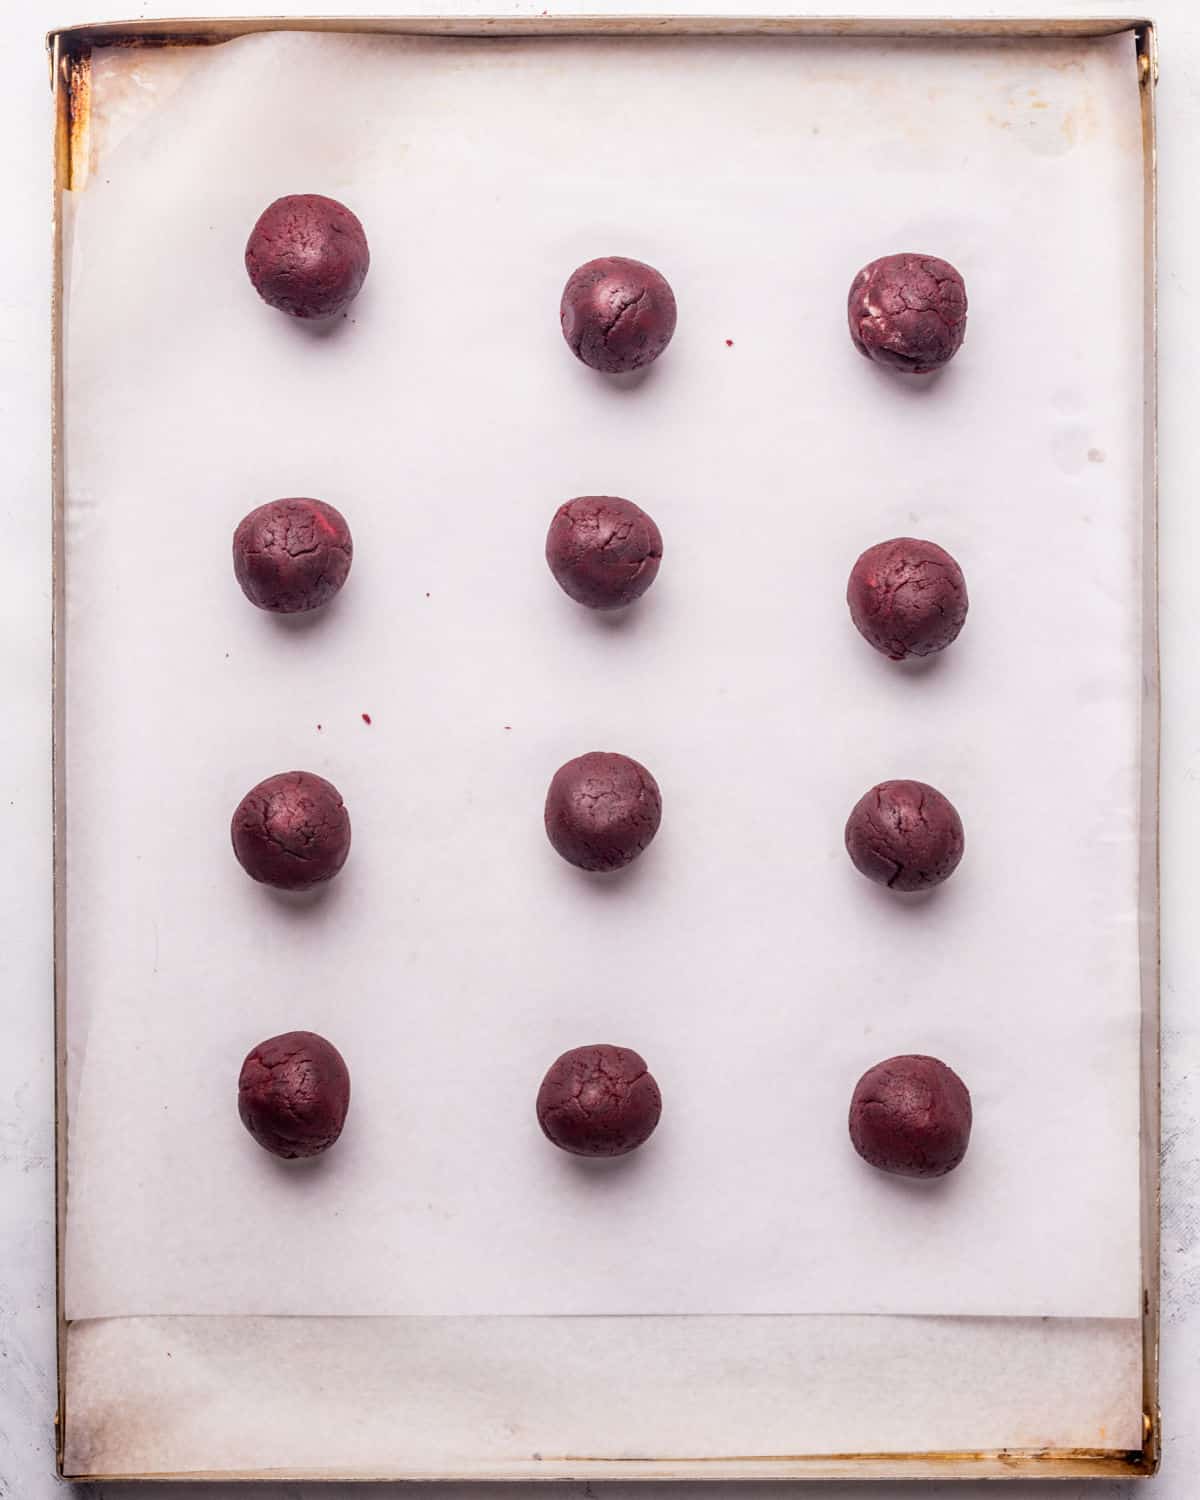 Top view of red velvet cake balls on parchment paper on a baking sheet.